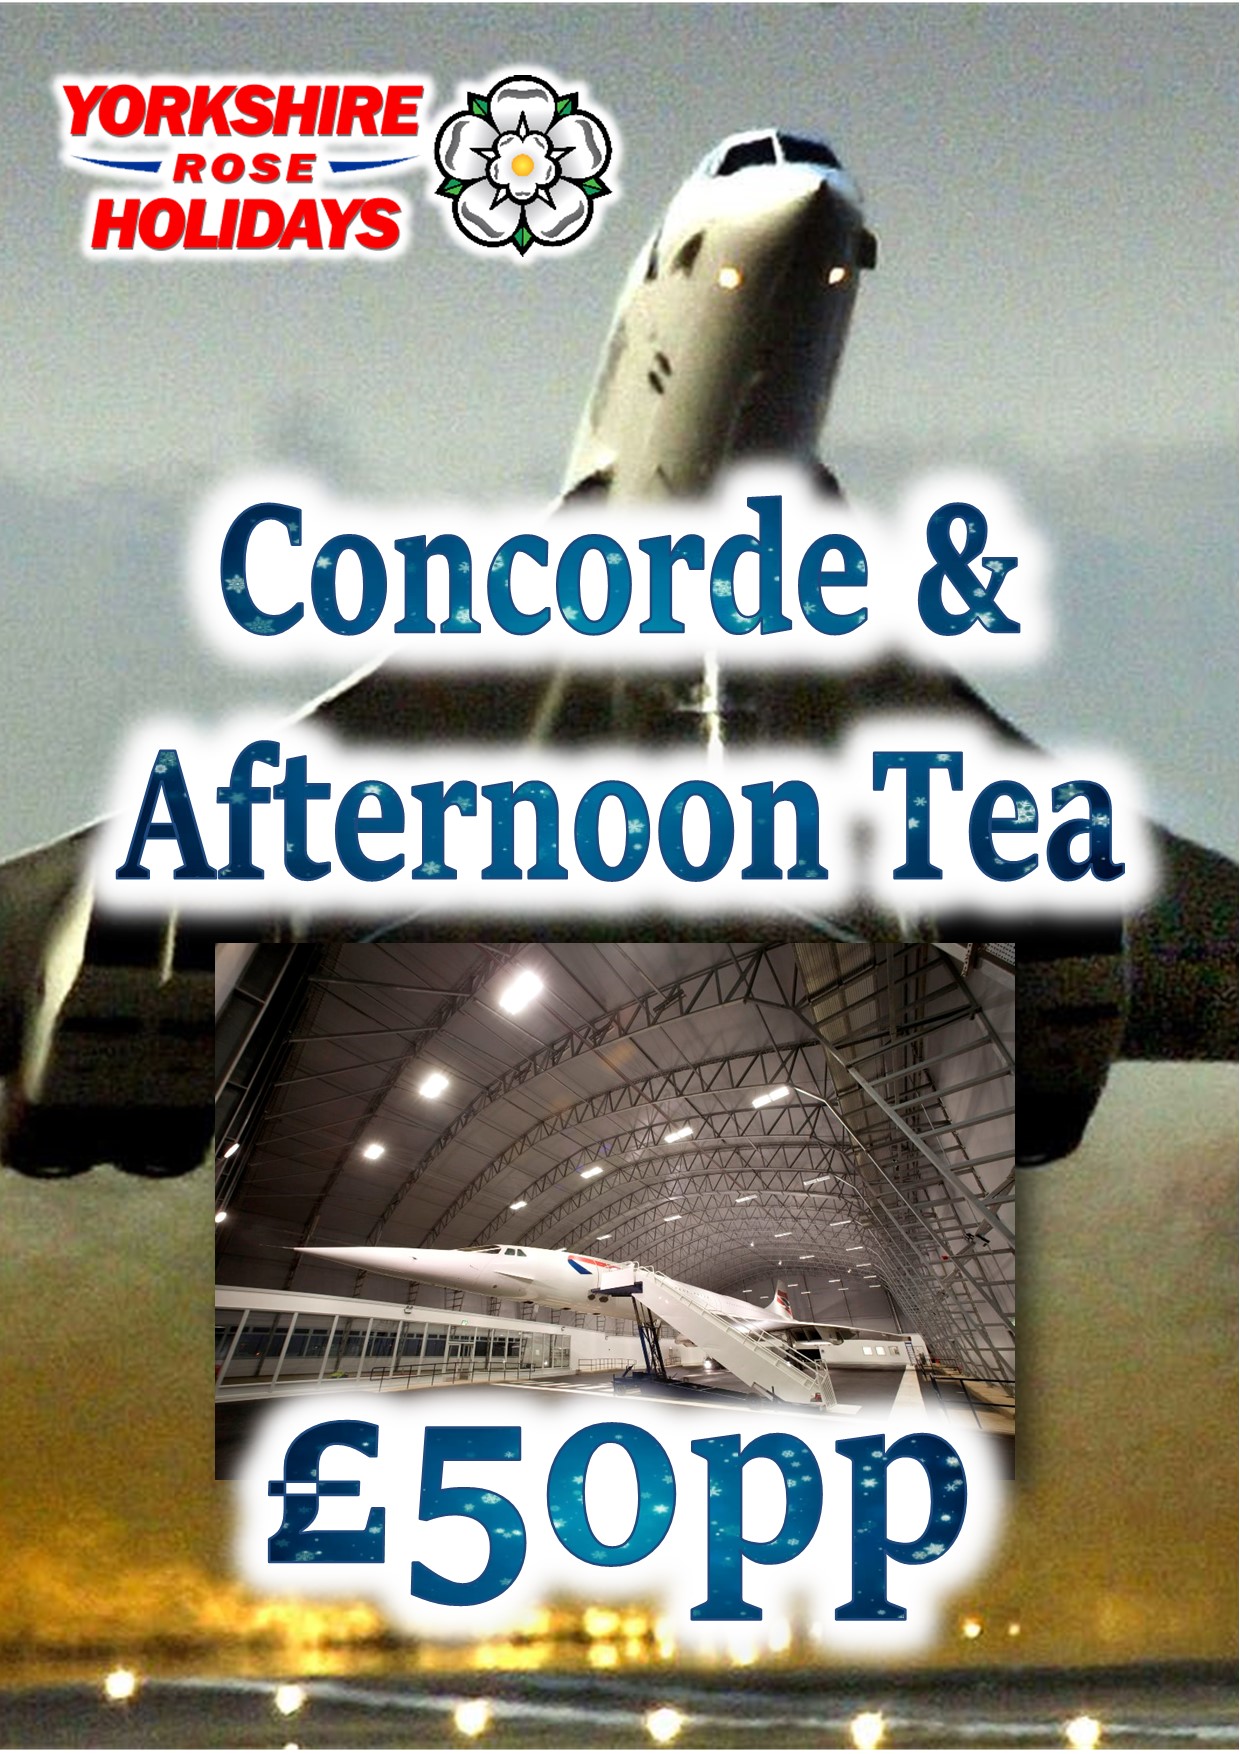 Concorde with afternoon tea